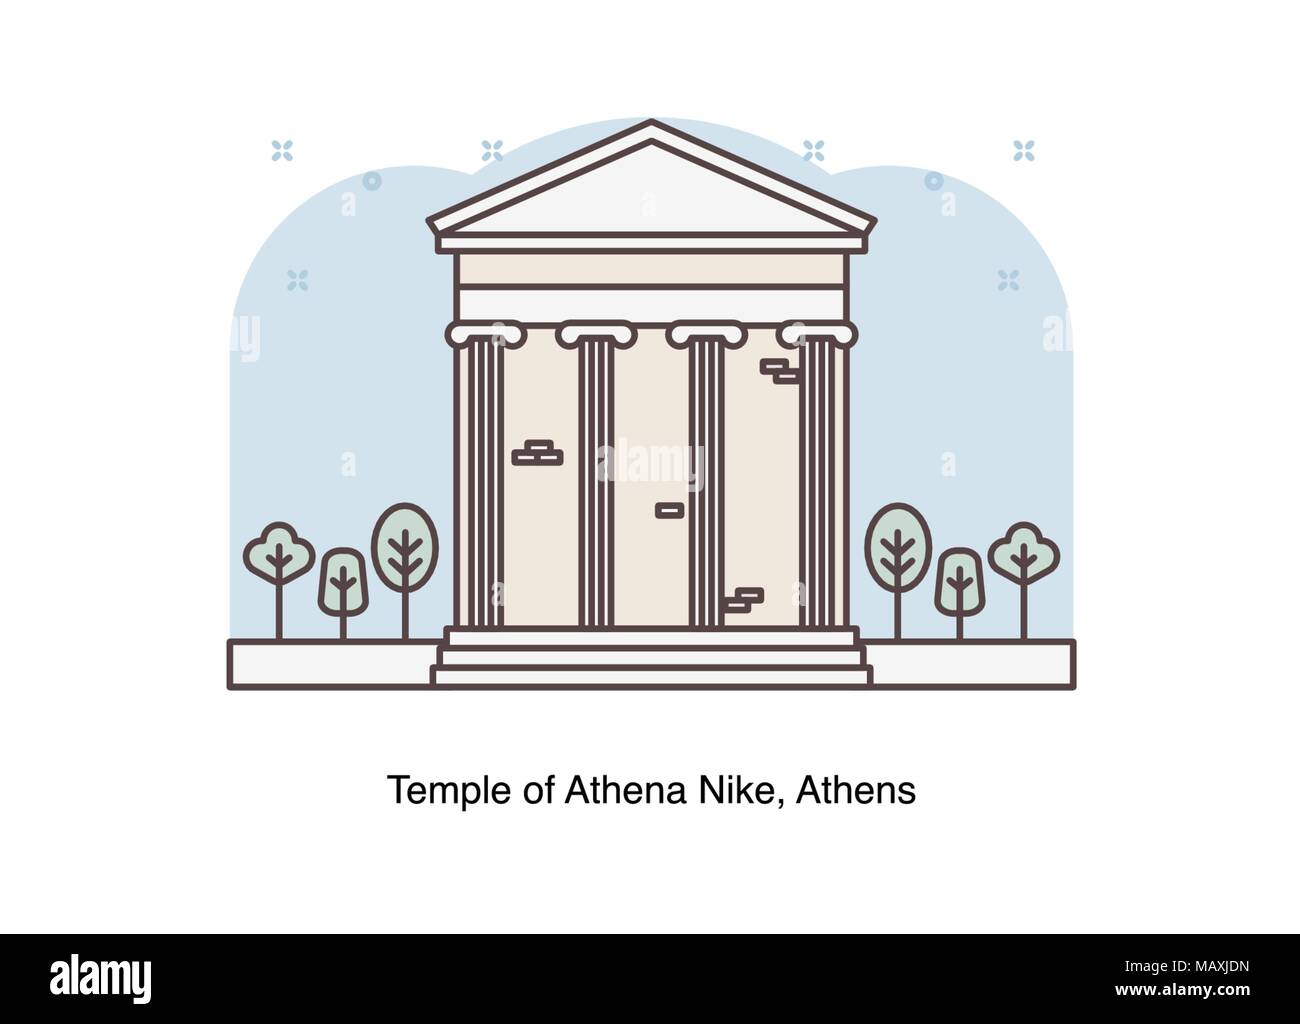 Vector line illustration of the Temple of Athena Nike, Athens, Greece. Stock Vector